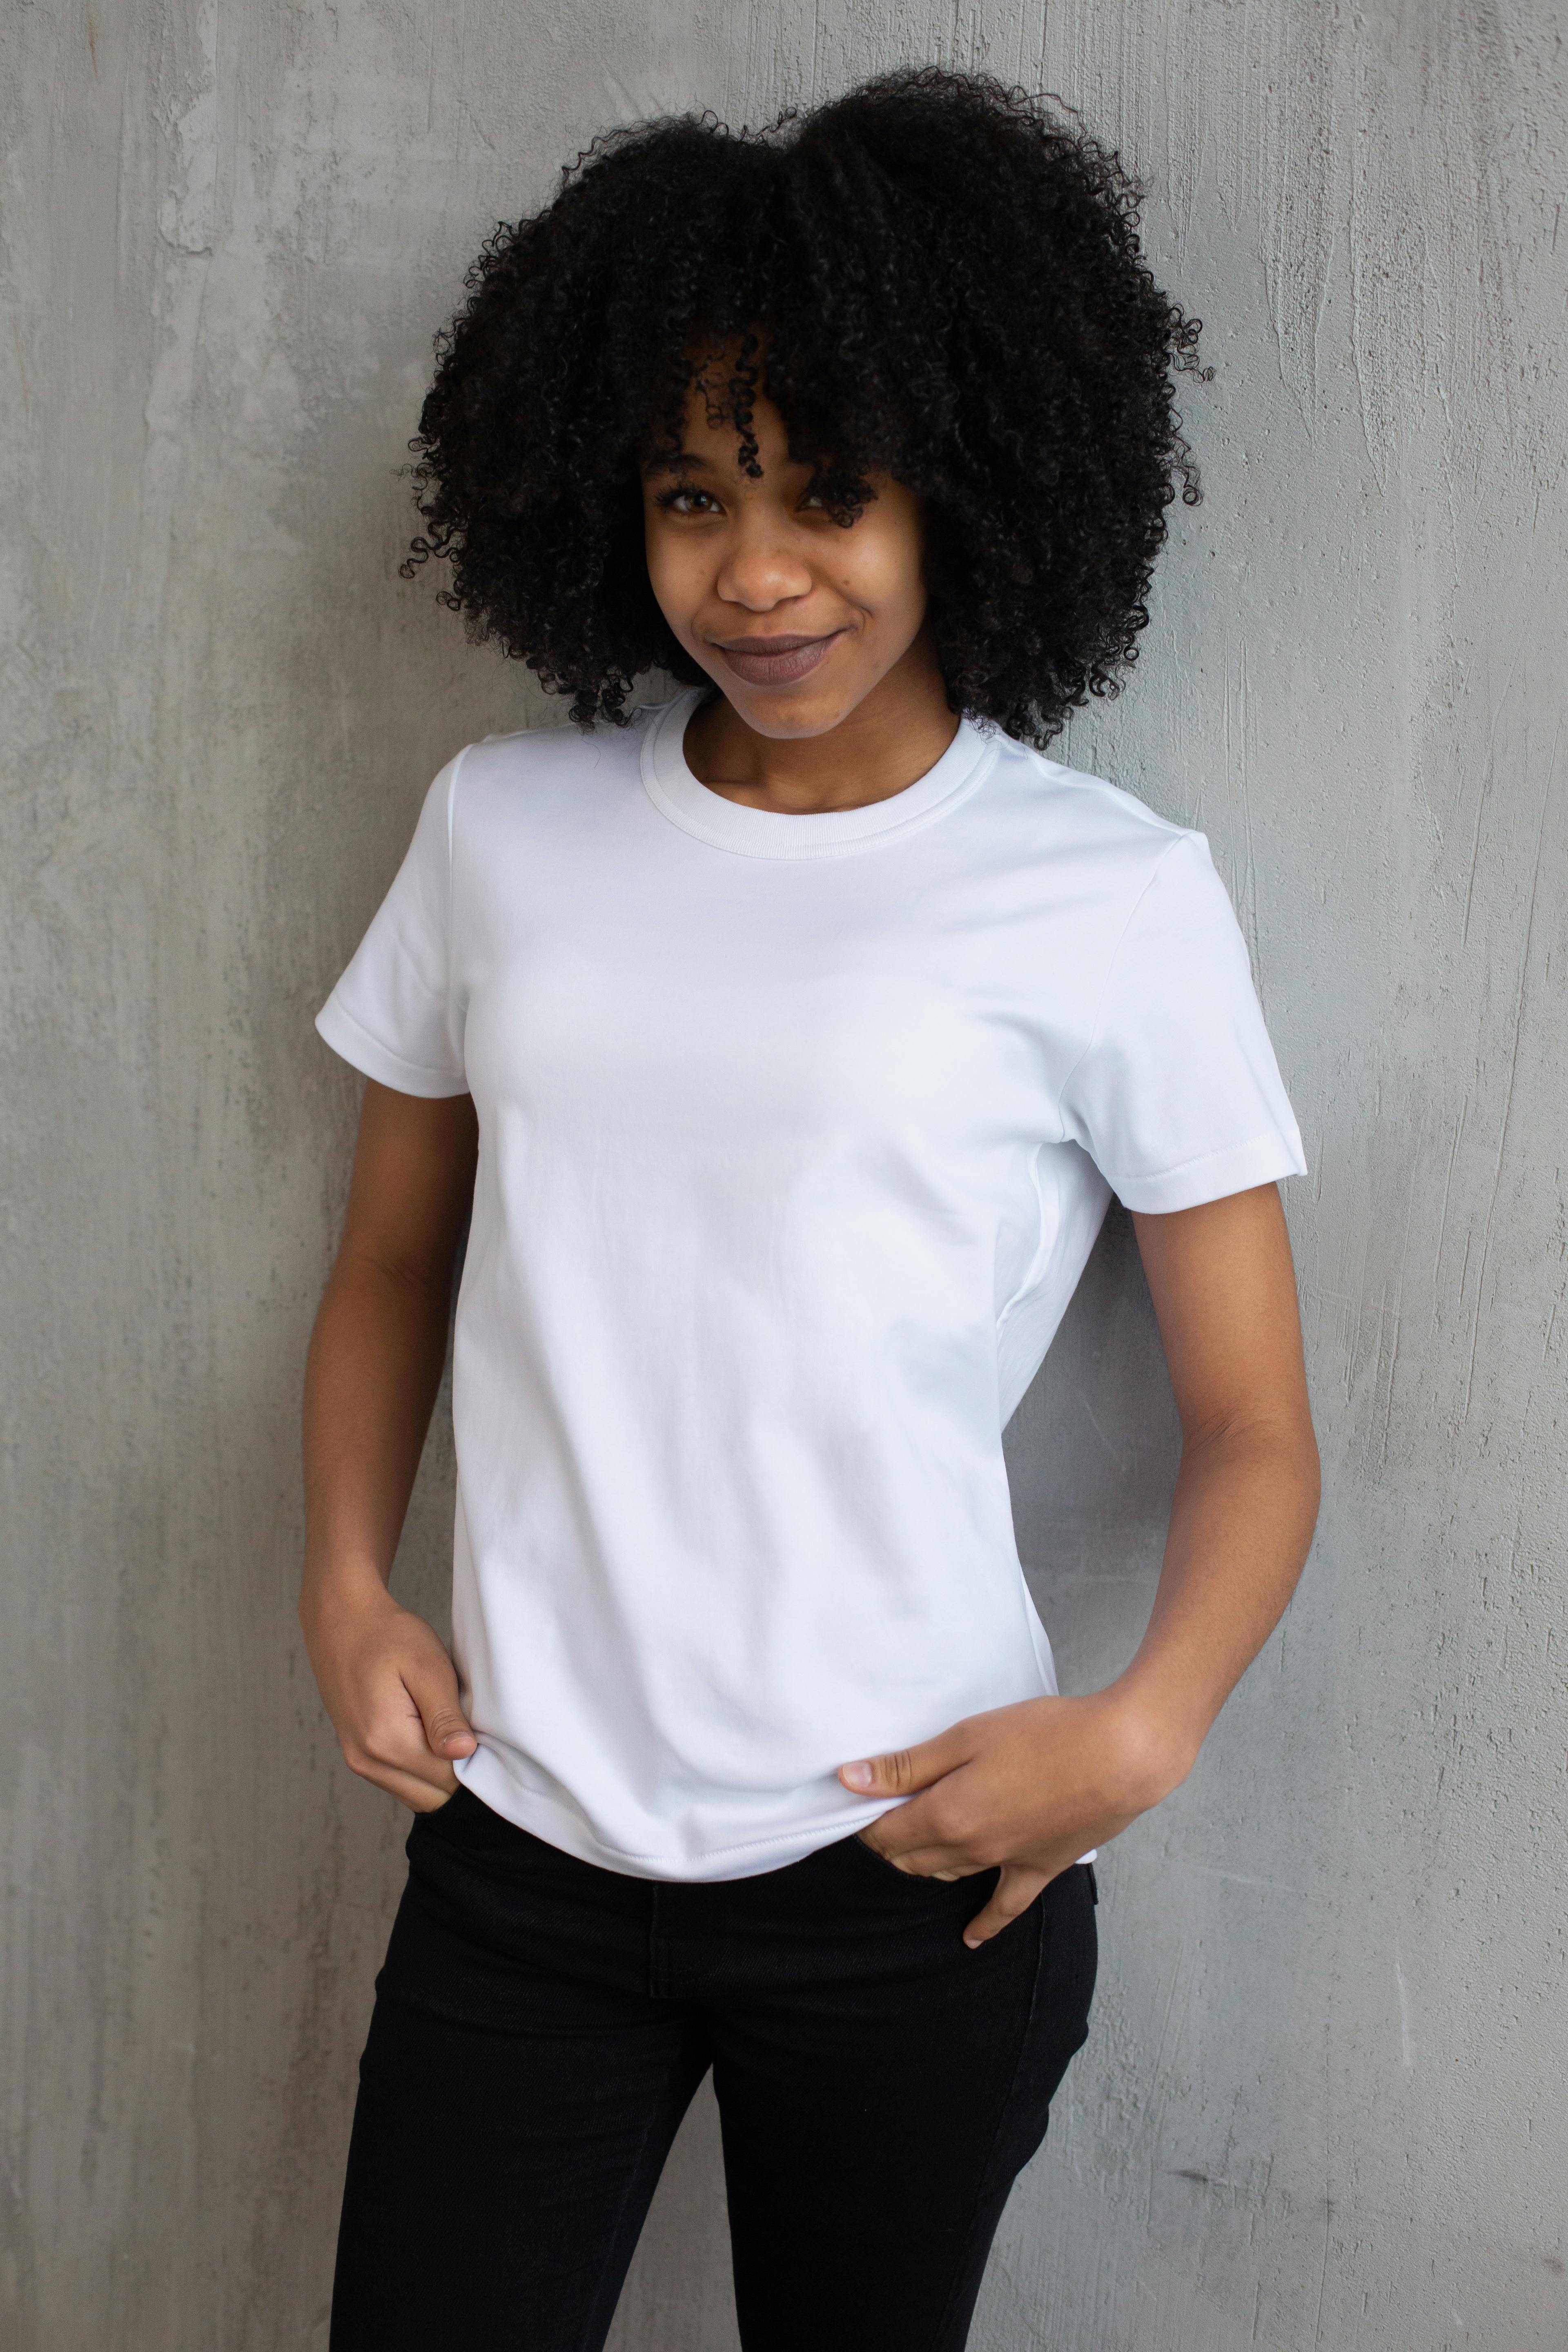 smiling black woman in casual clothes standing against gray wall